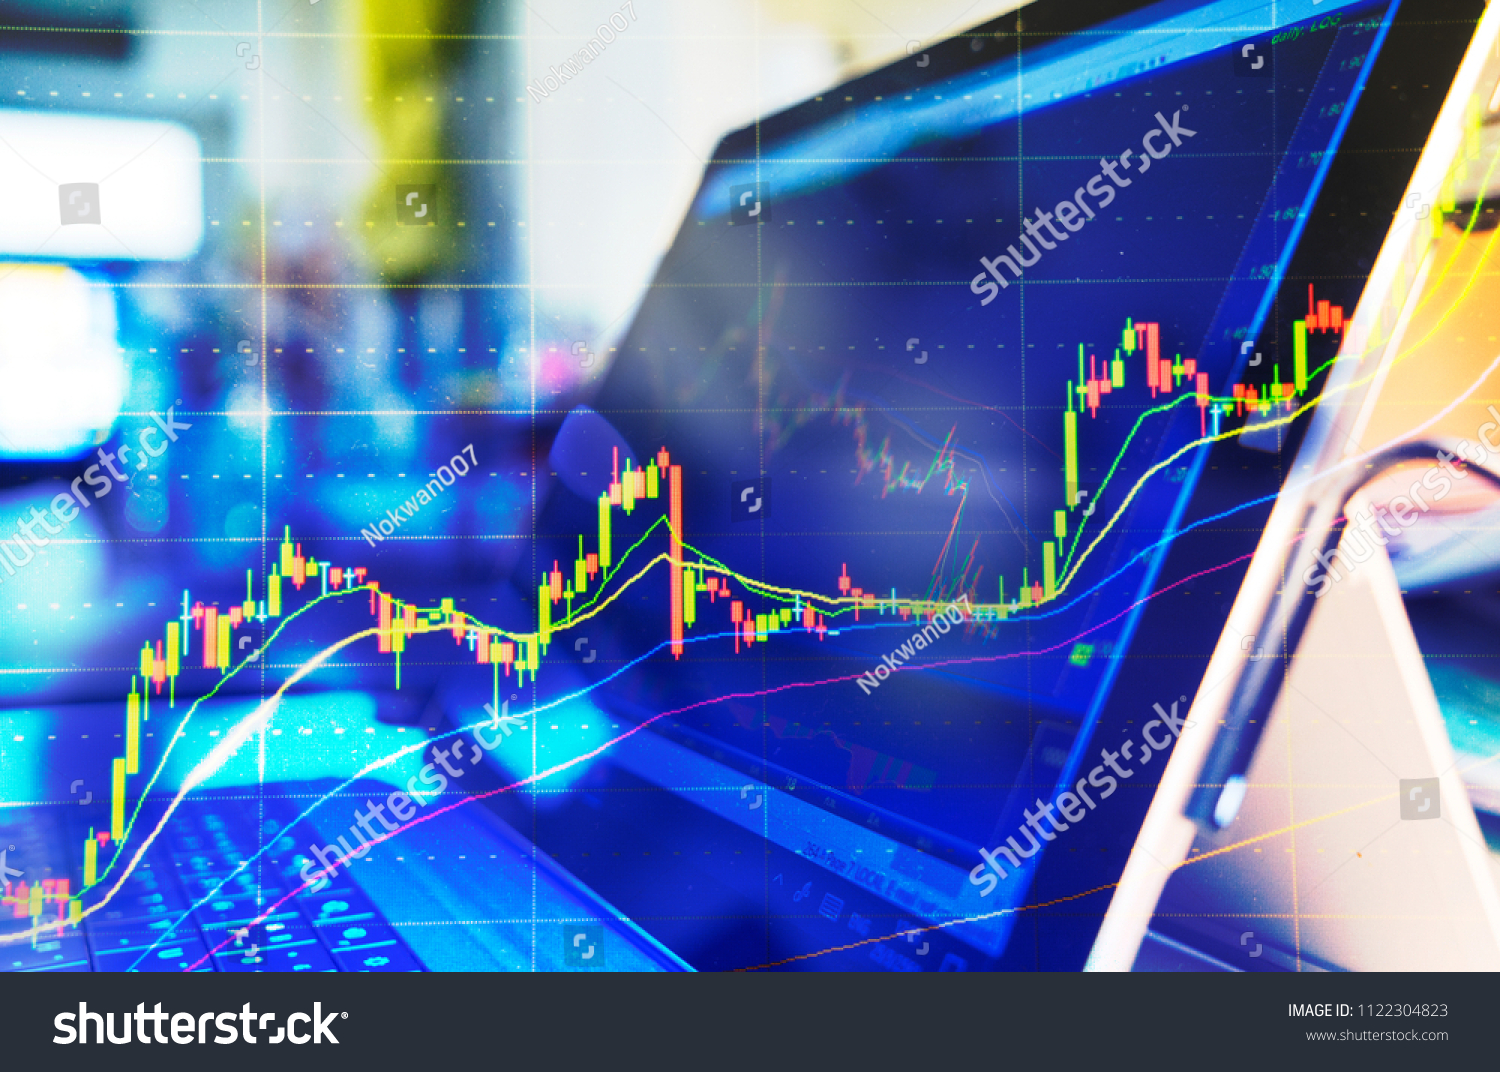 Computer screen with selective focus of technical price graph and indicator, red and green candlestick chart, market volatility, up and down trend. Stock trading, crypto currency background. #1122304823